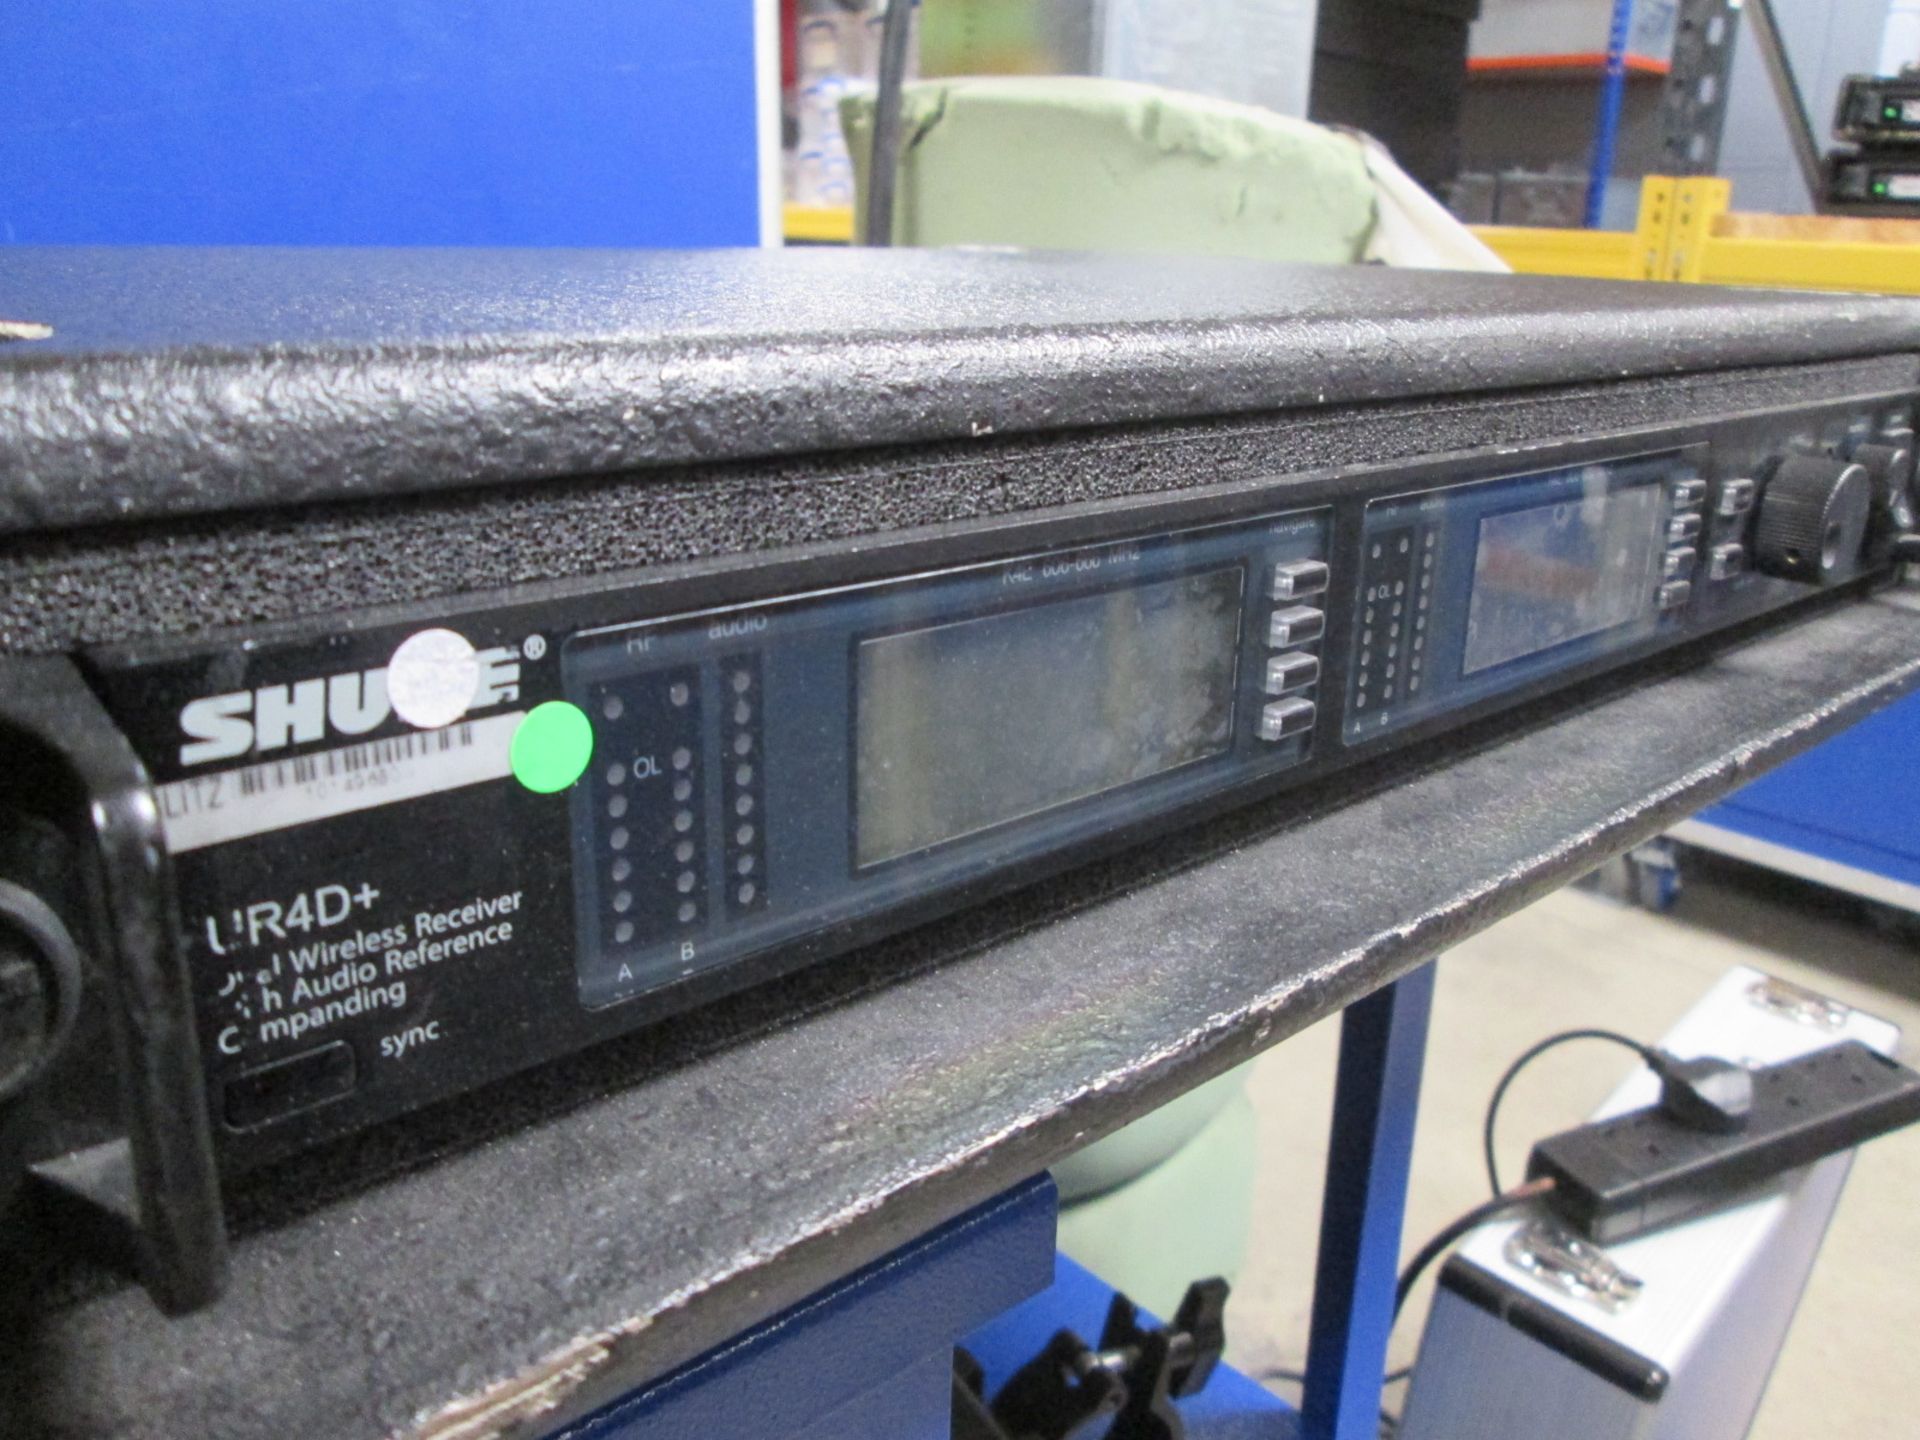 Shure UR4D+ Dual Wireless Receiver with Audio Reference Compounding K4E 606-666 MHz (Qty 2) Includes - Image 3 of 9